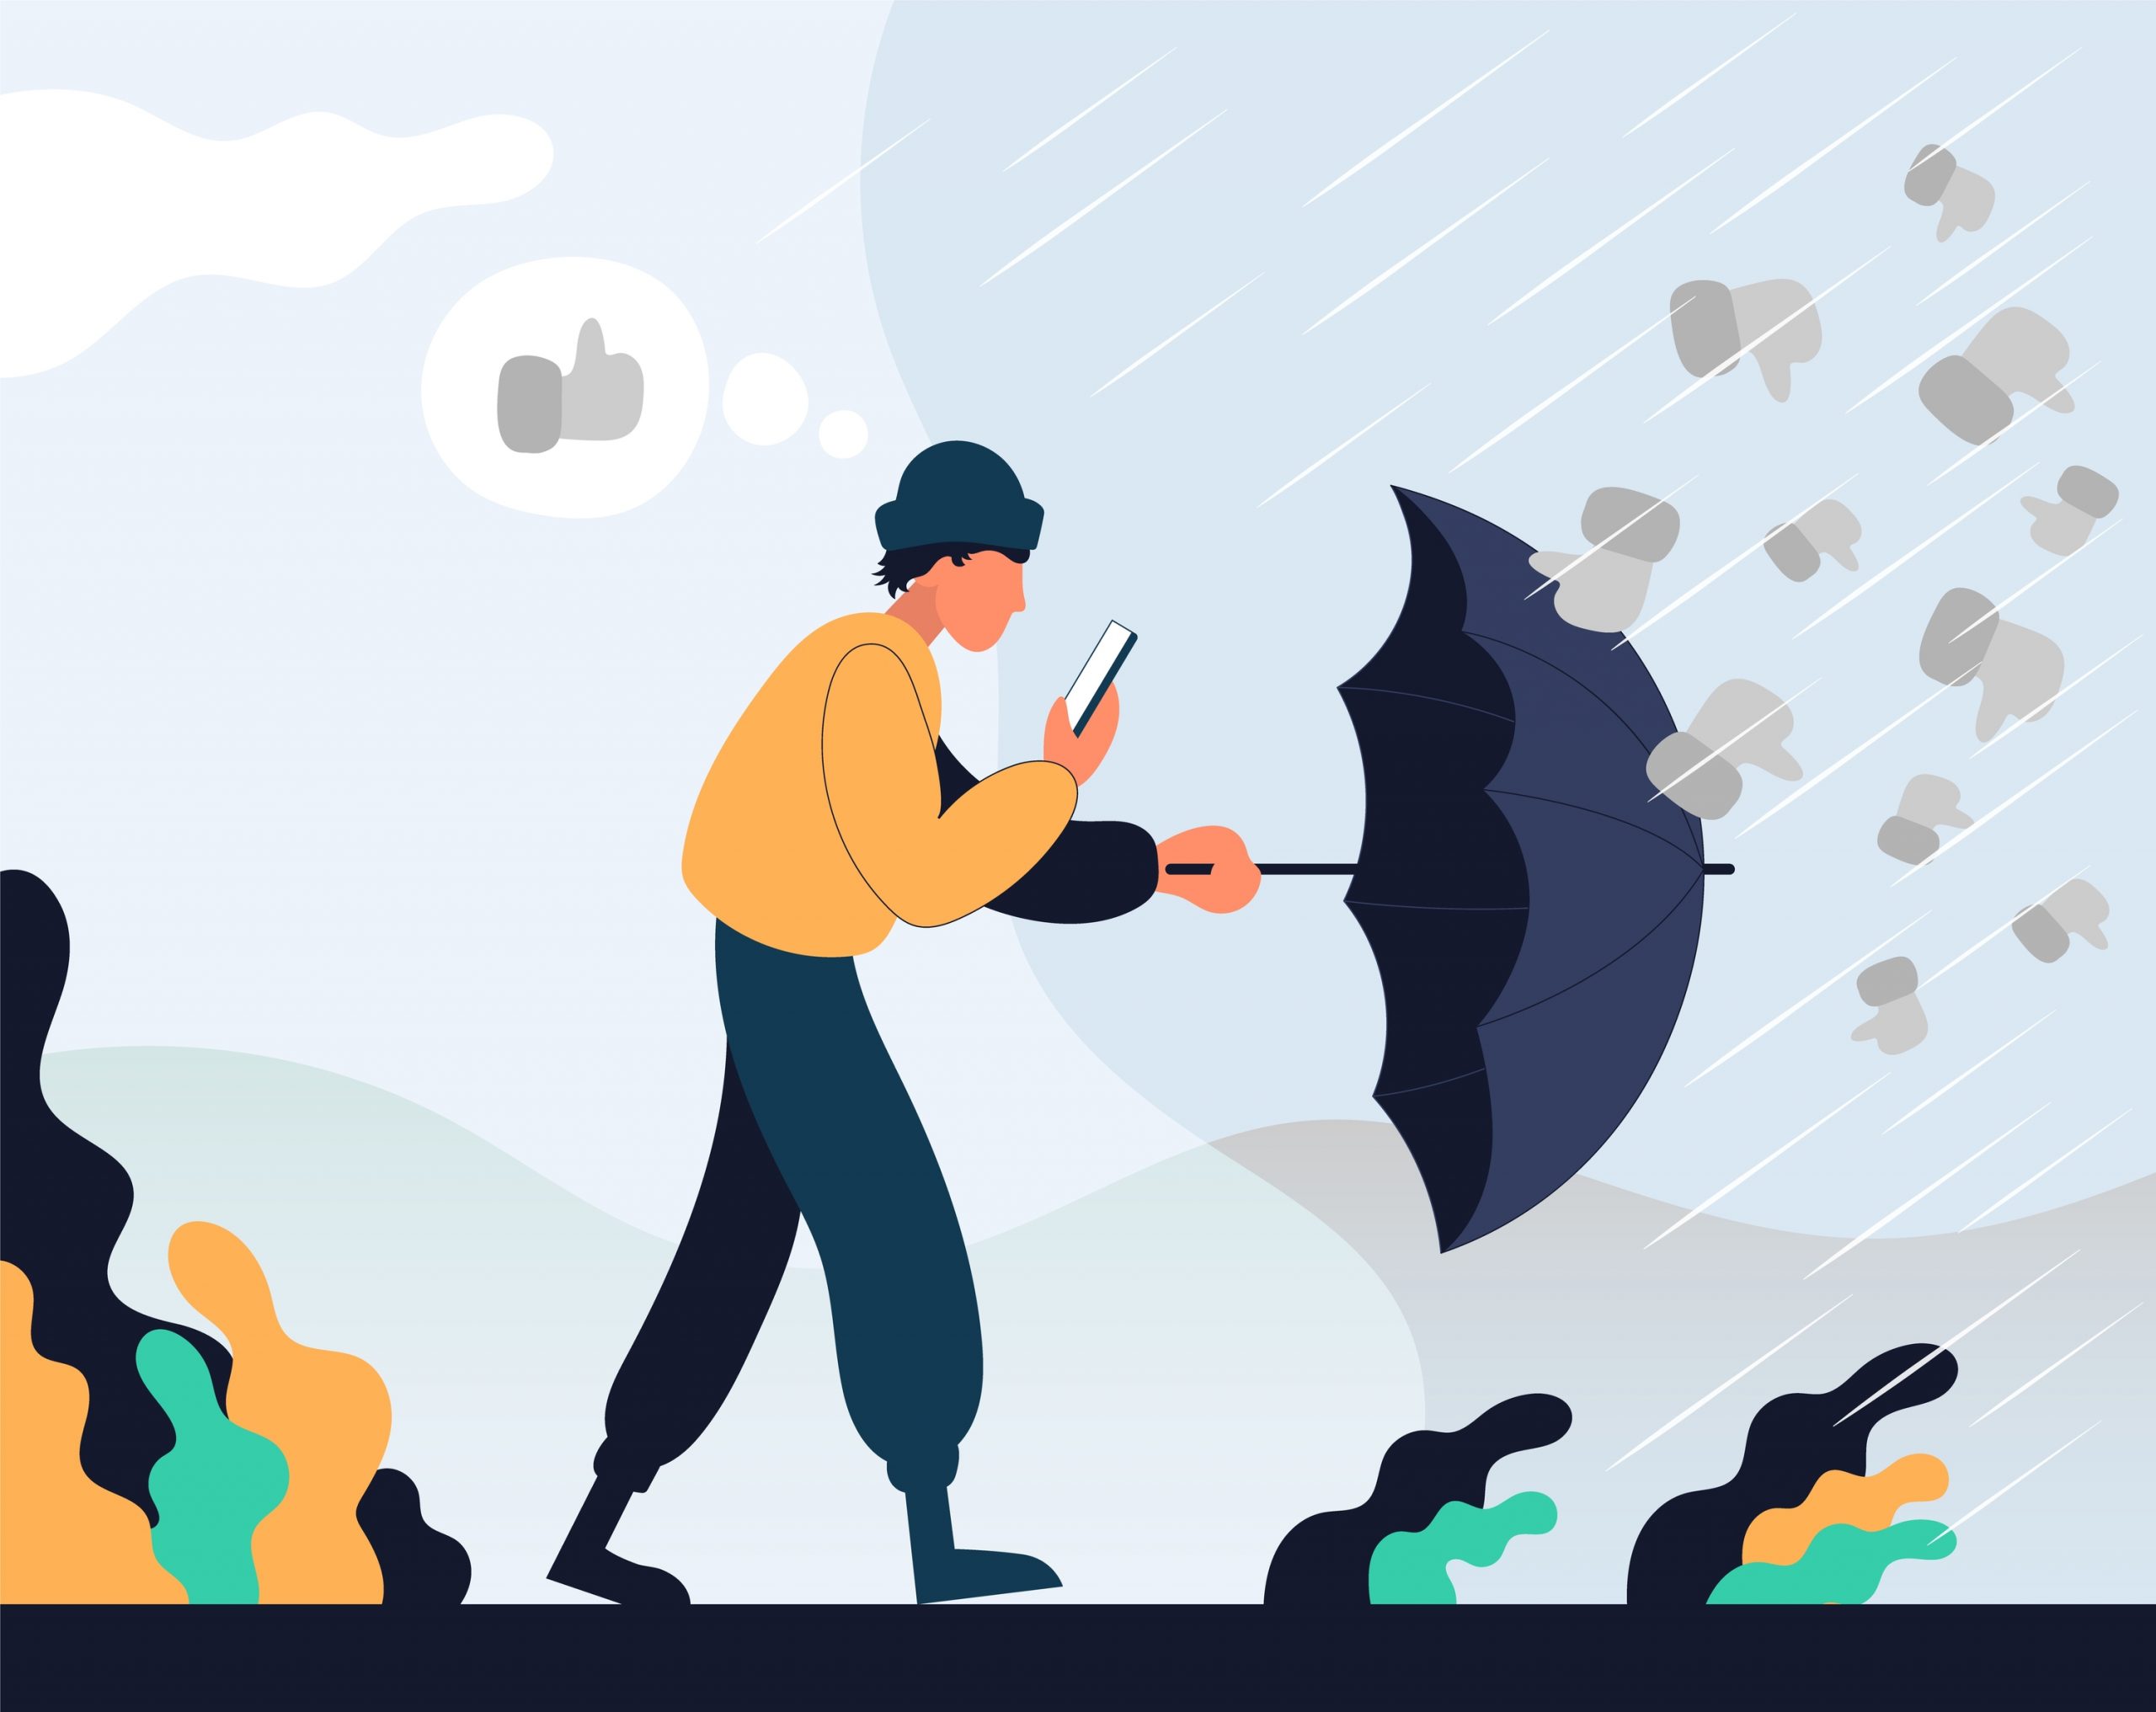 Can Your Marketing Strategy Weather the Storm